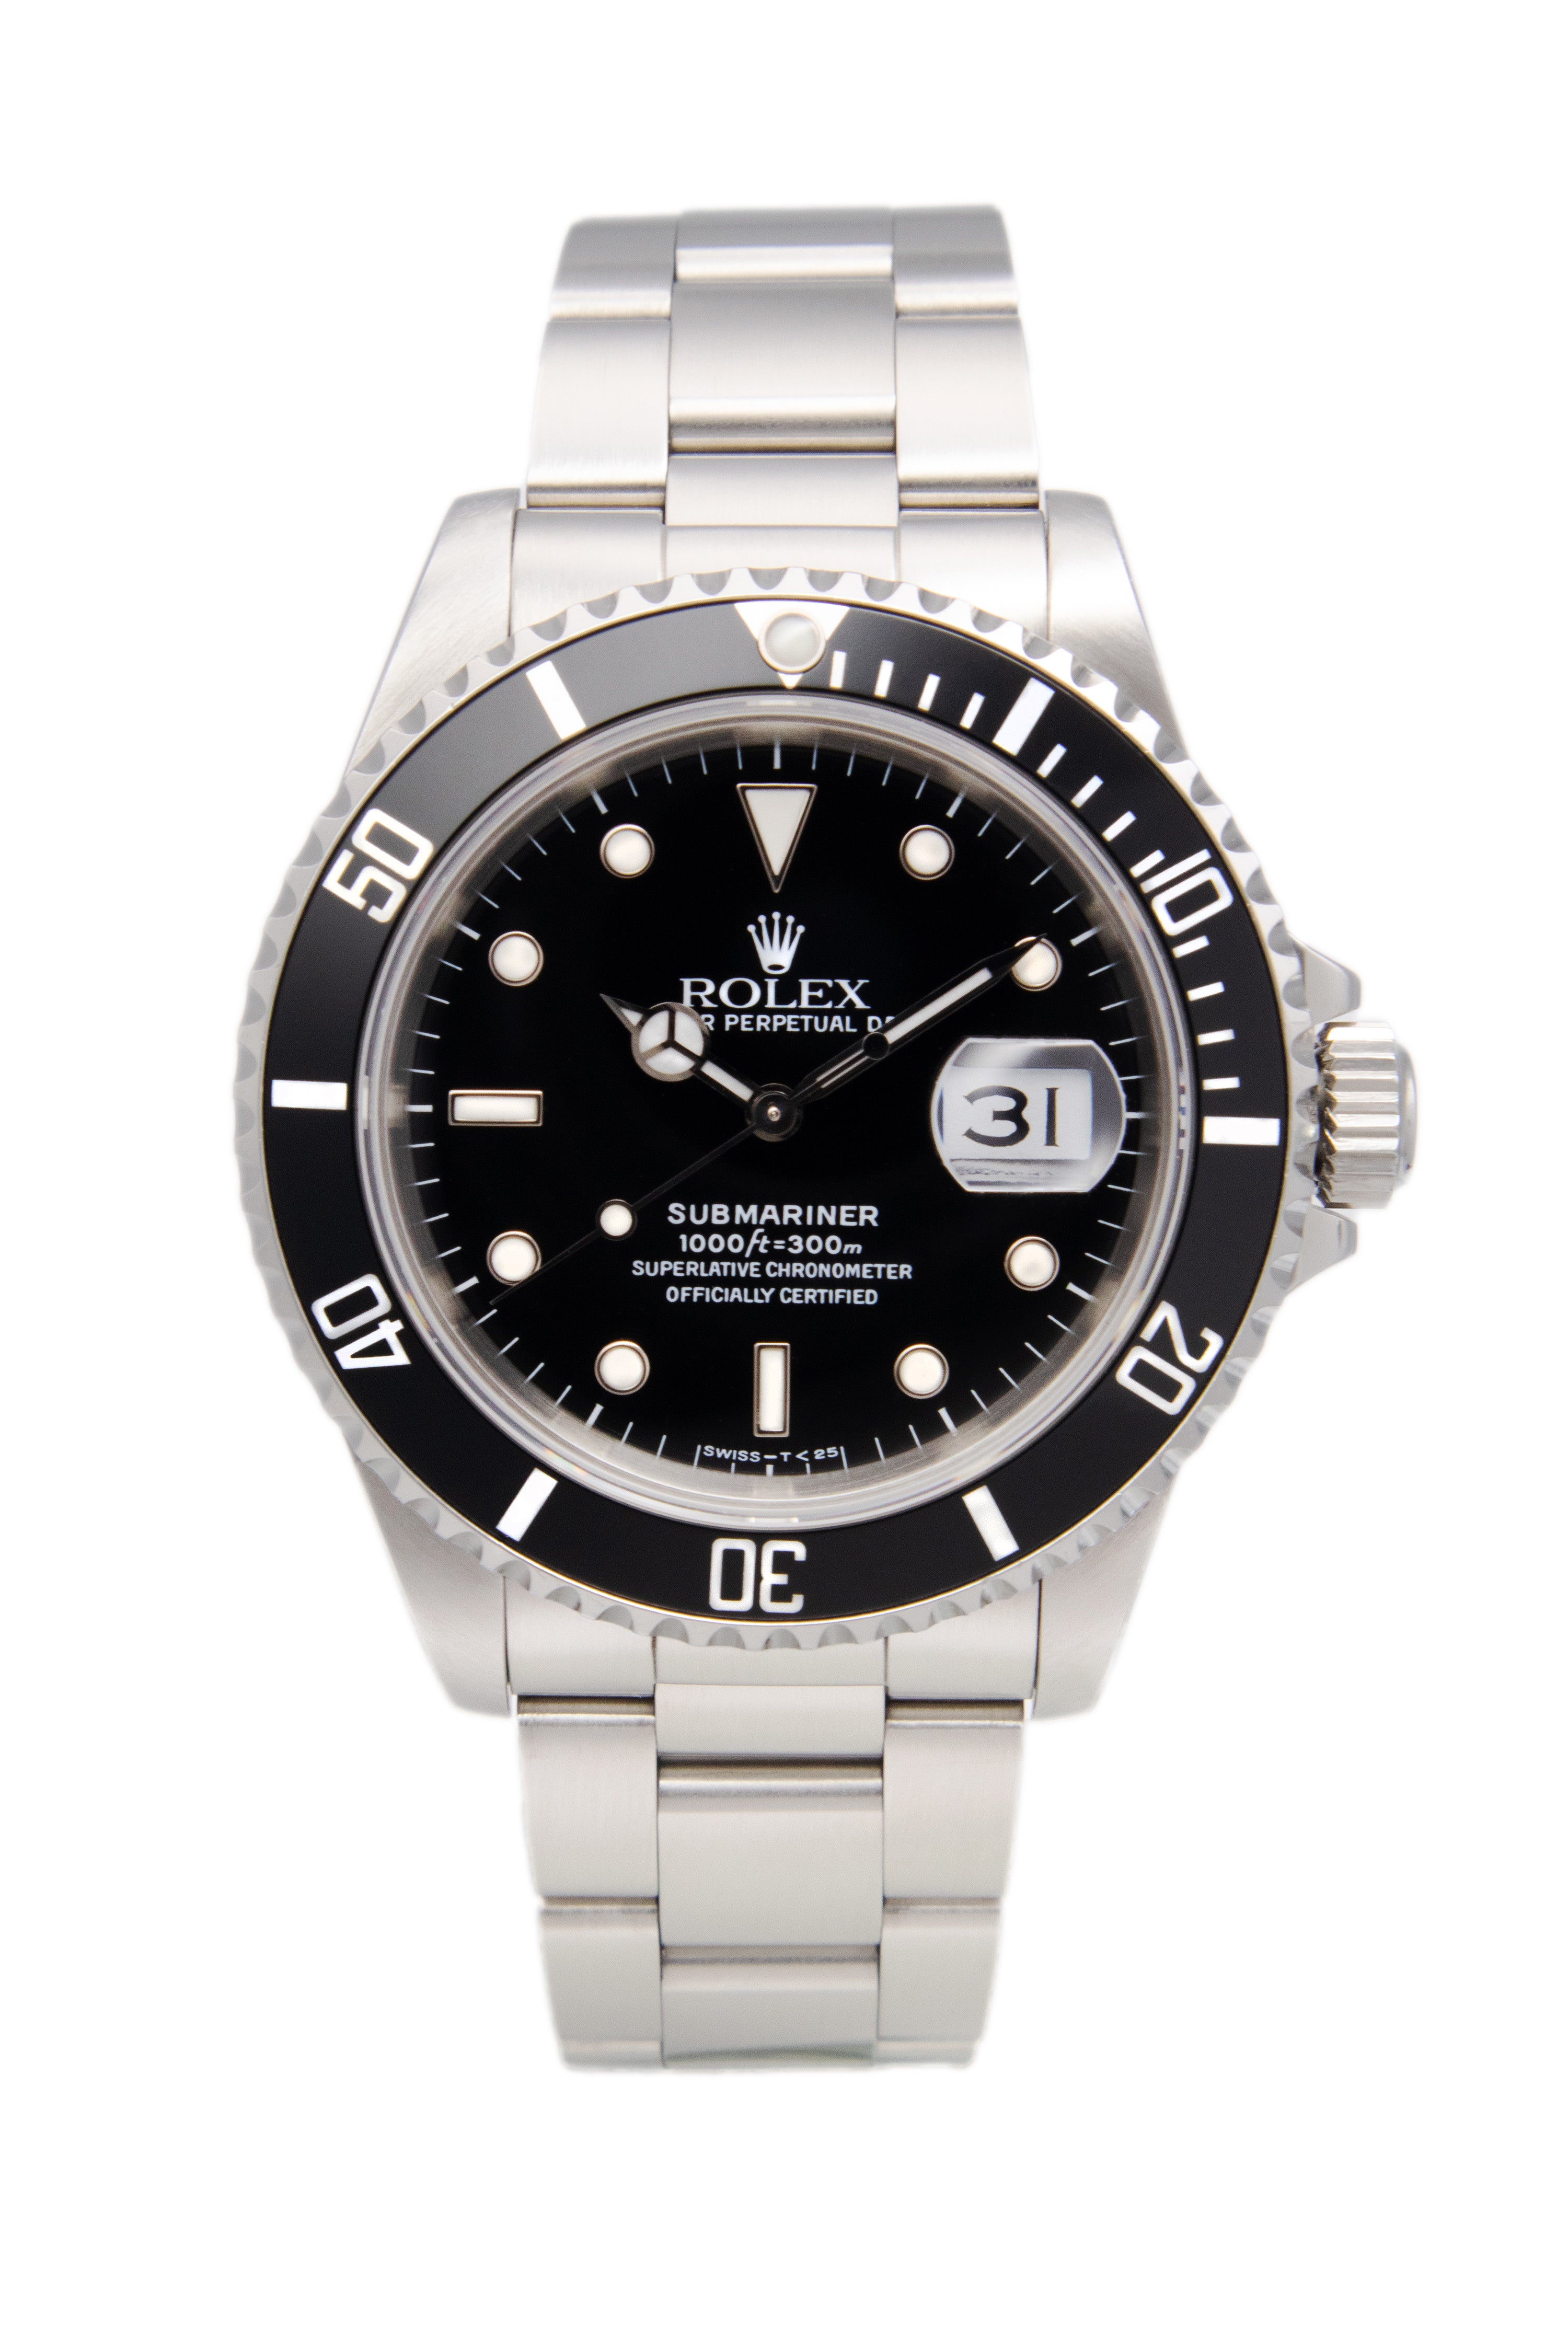 Stort univers forår indhente 585-2890 - Pre-Owned Rolex Submariner Date - 16610...